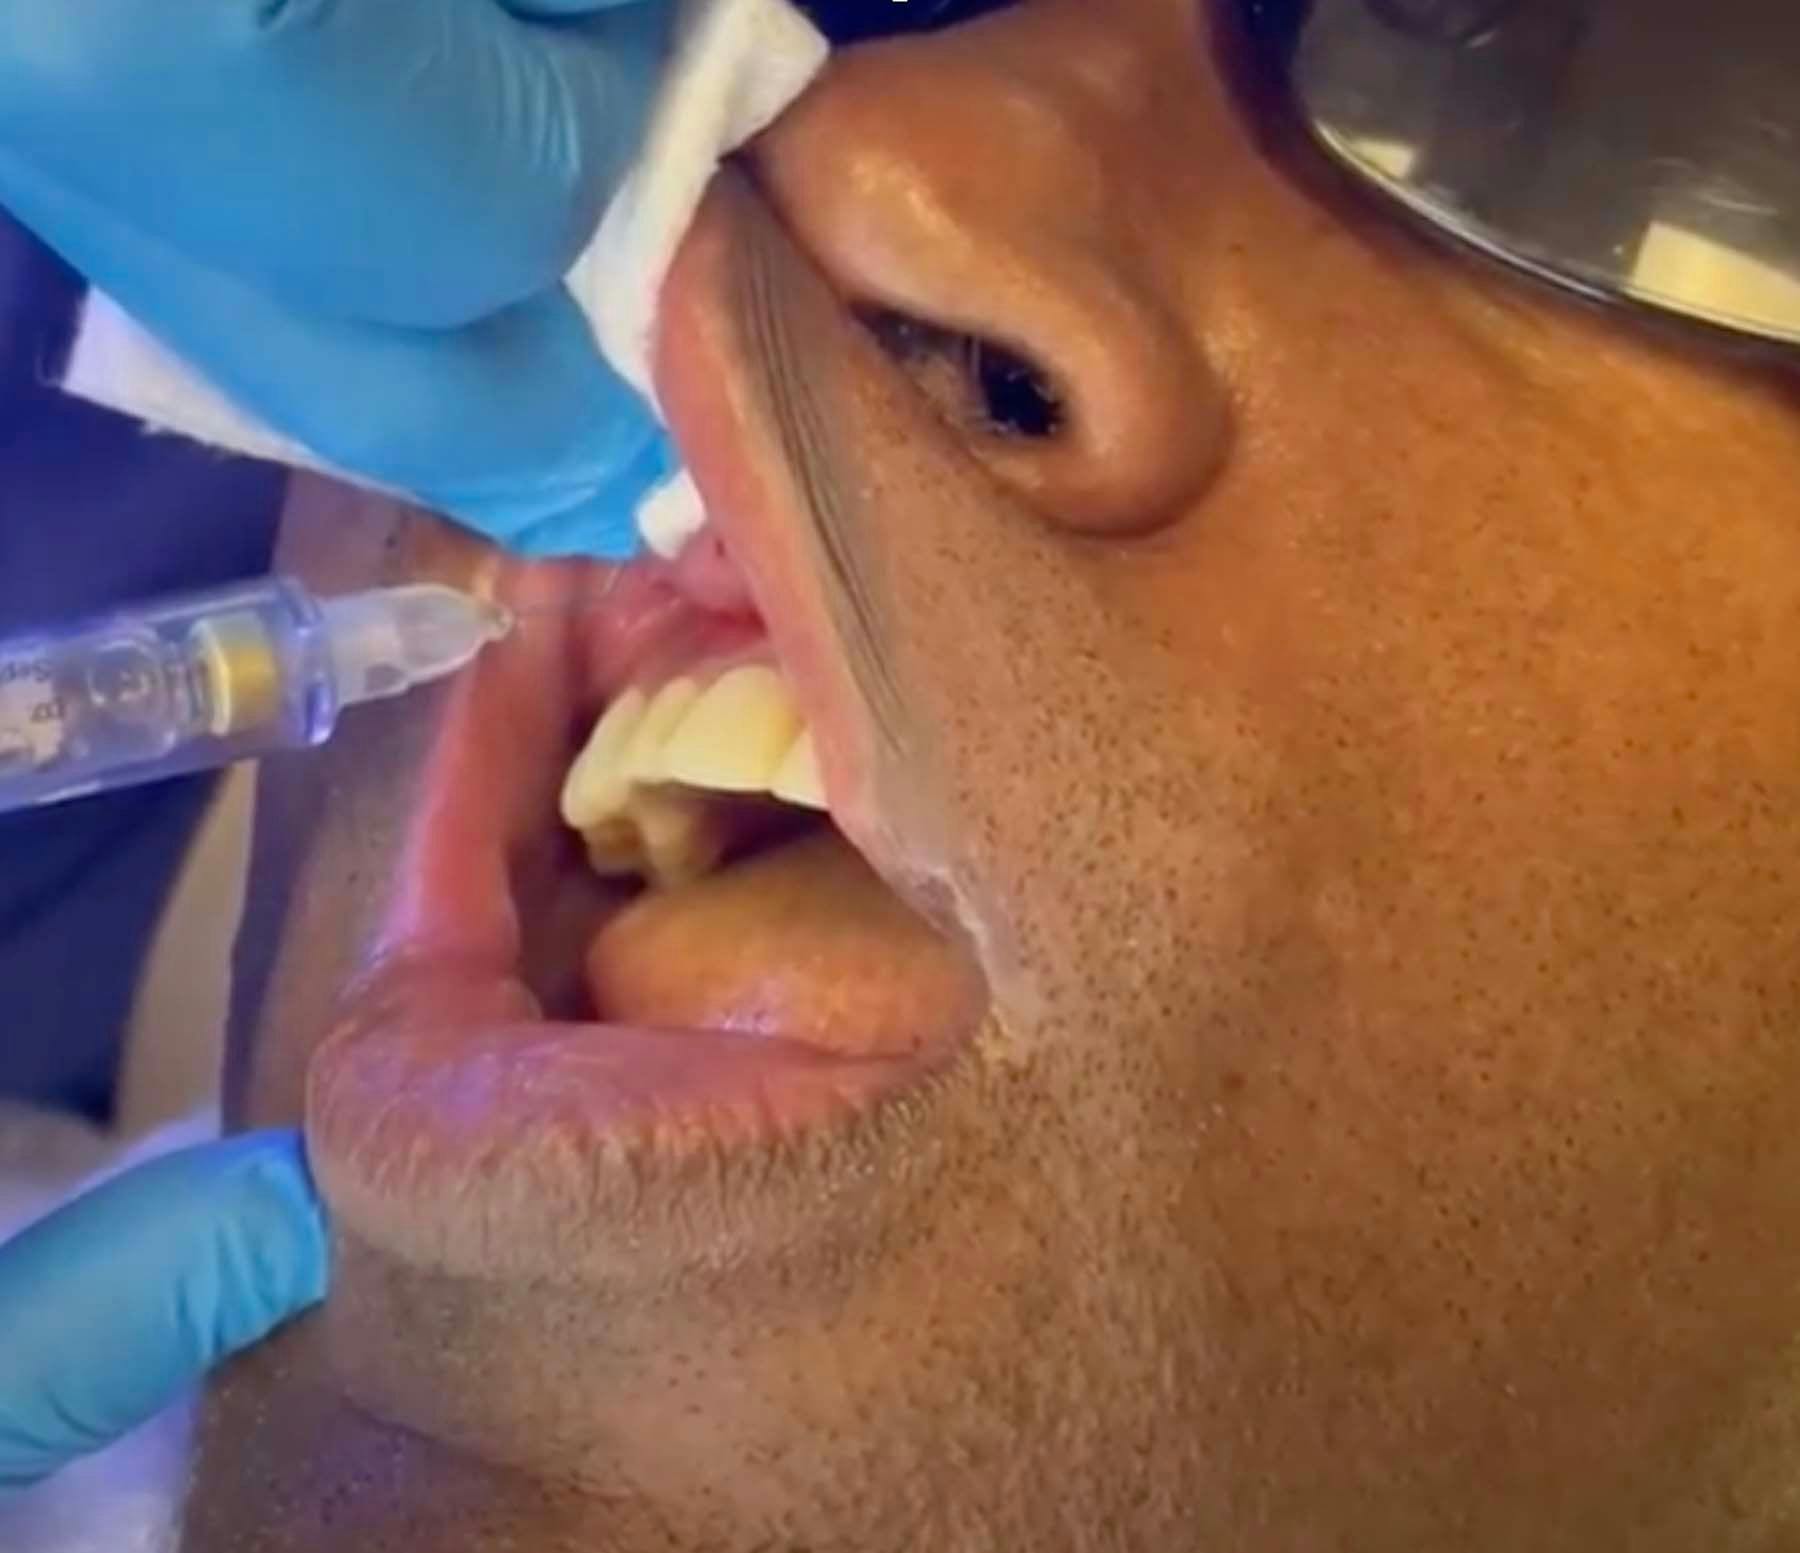 Figure 1. Labial vestibular injections just under the nostrils are often the most painful injections. With nearly 100% consistency, the Calaject computerized anesthetic technique resulted in zero pain for this otherwise stressful and uncomfortable procedure. Clinical images courtesy of Tony Tomaro, DDS